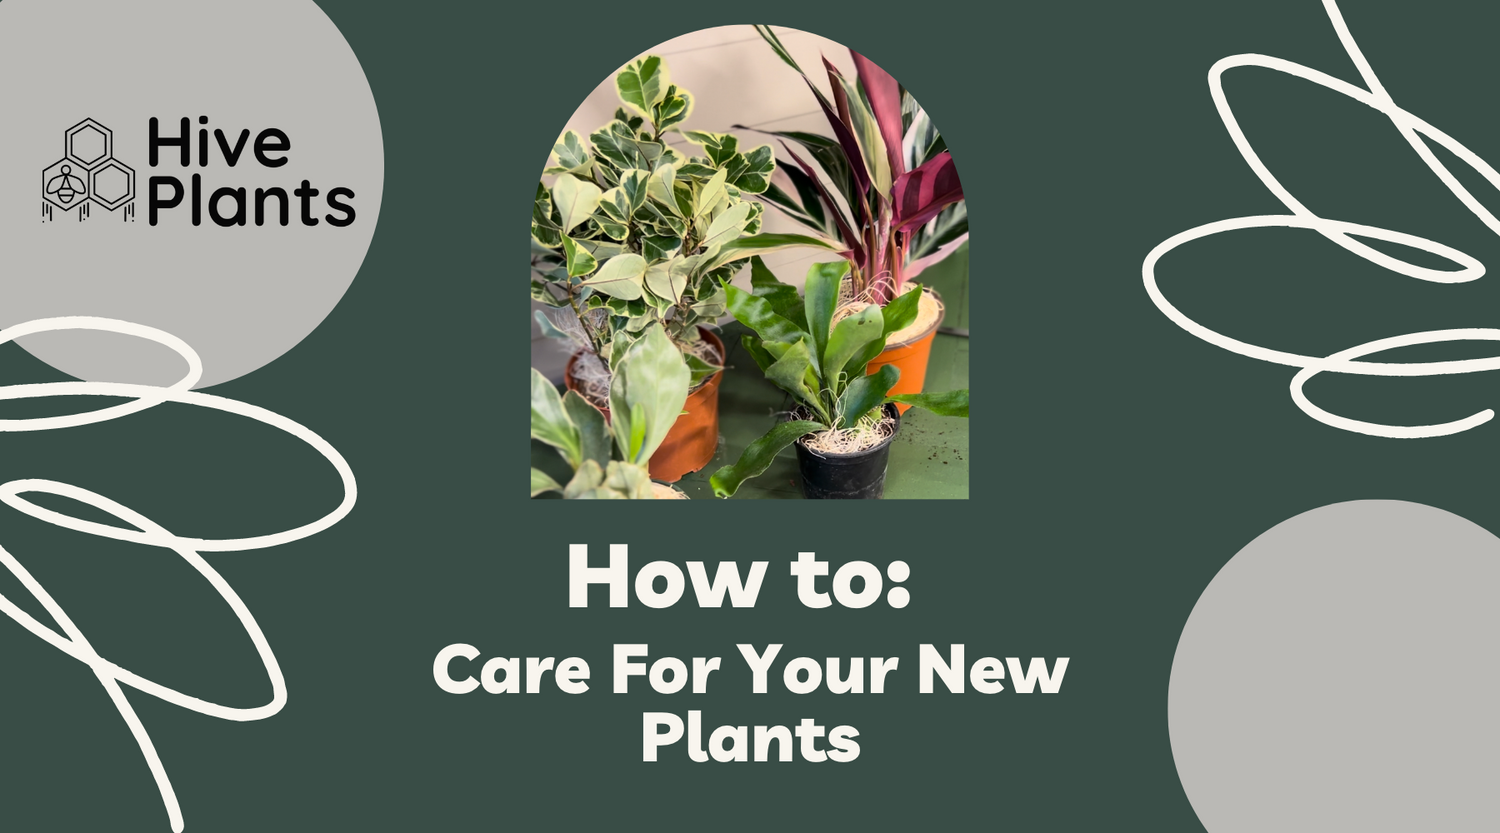 Unboxing New Plants: A Guide to Caring for Your New Green Friends